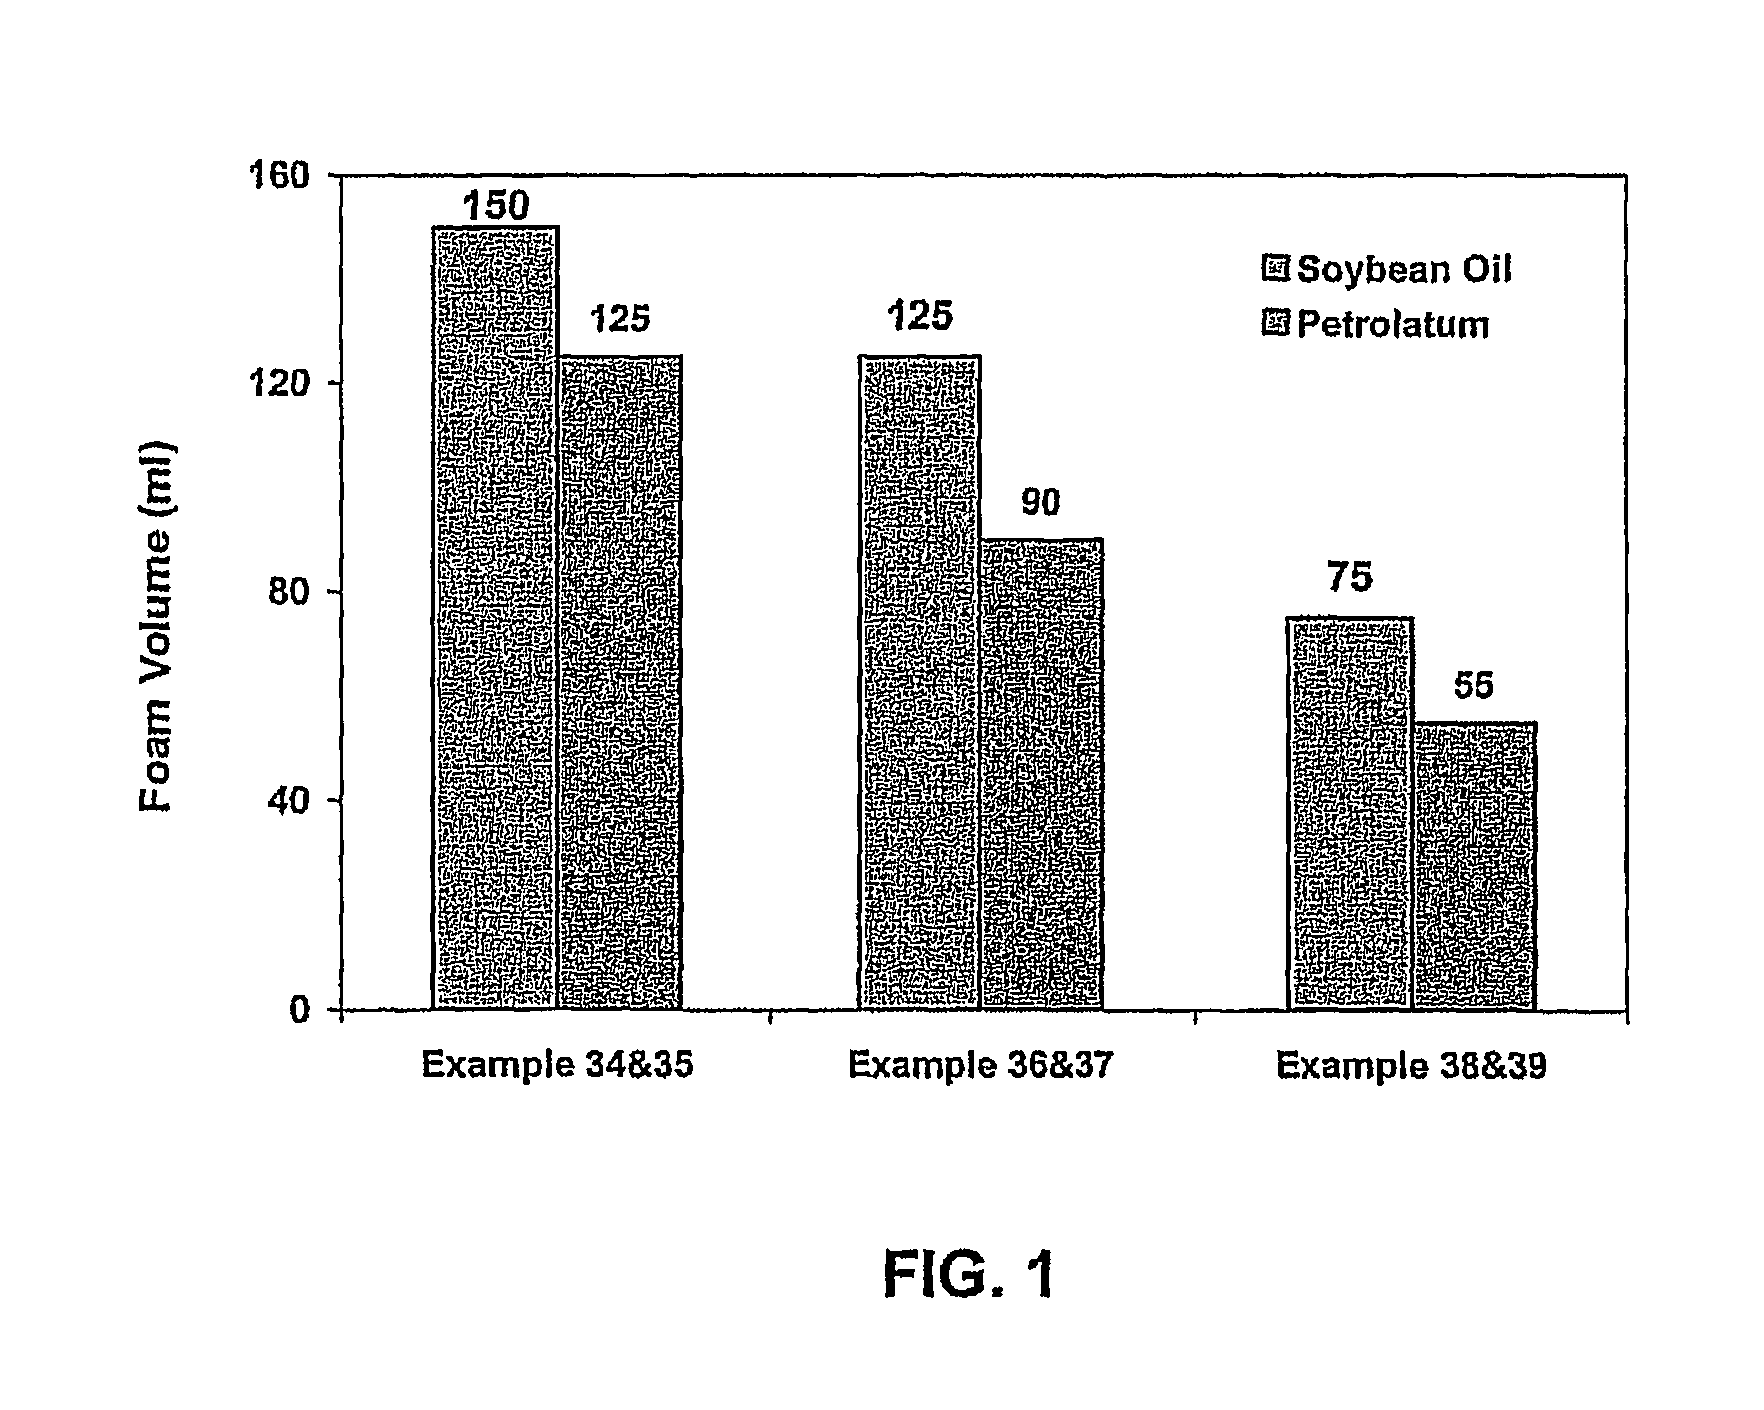 Liquid cleansing composition comprising a ternary mixture of anionic surfactants